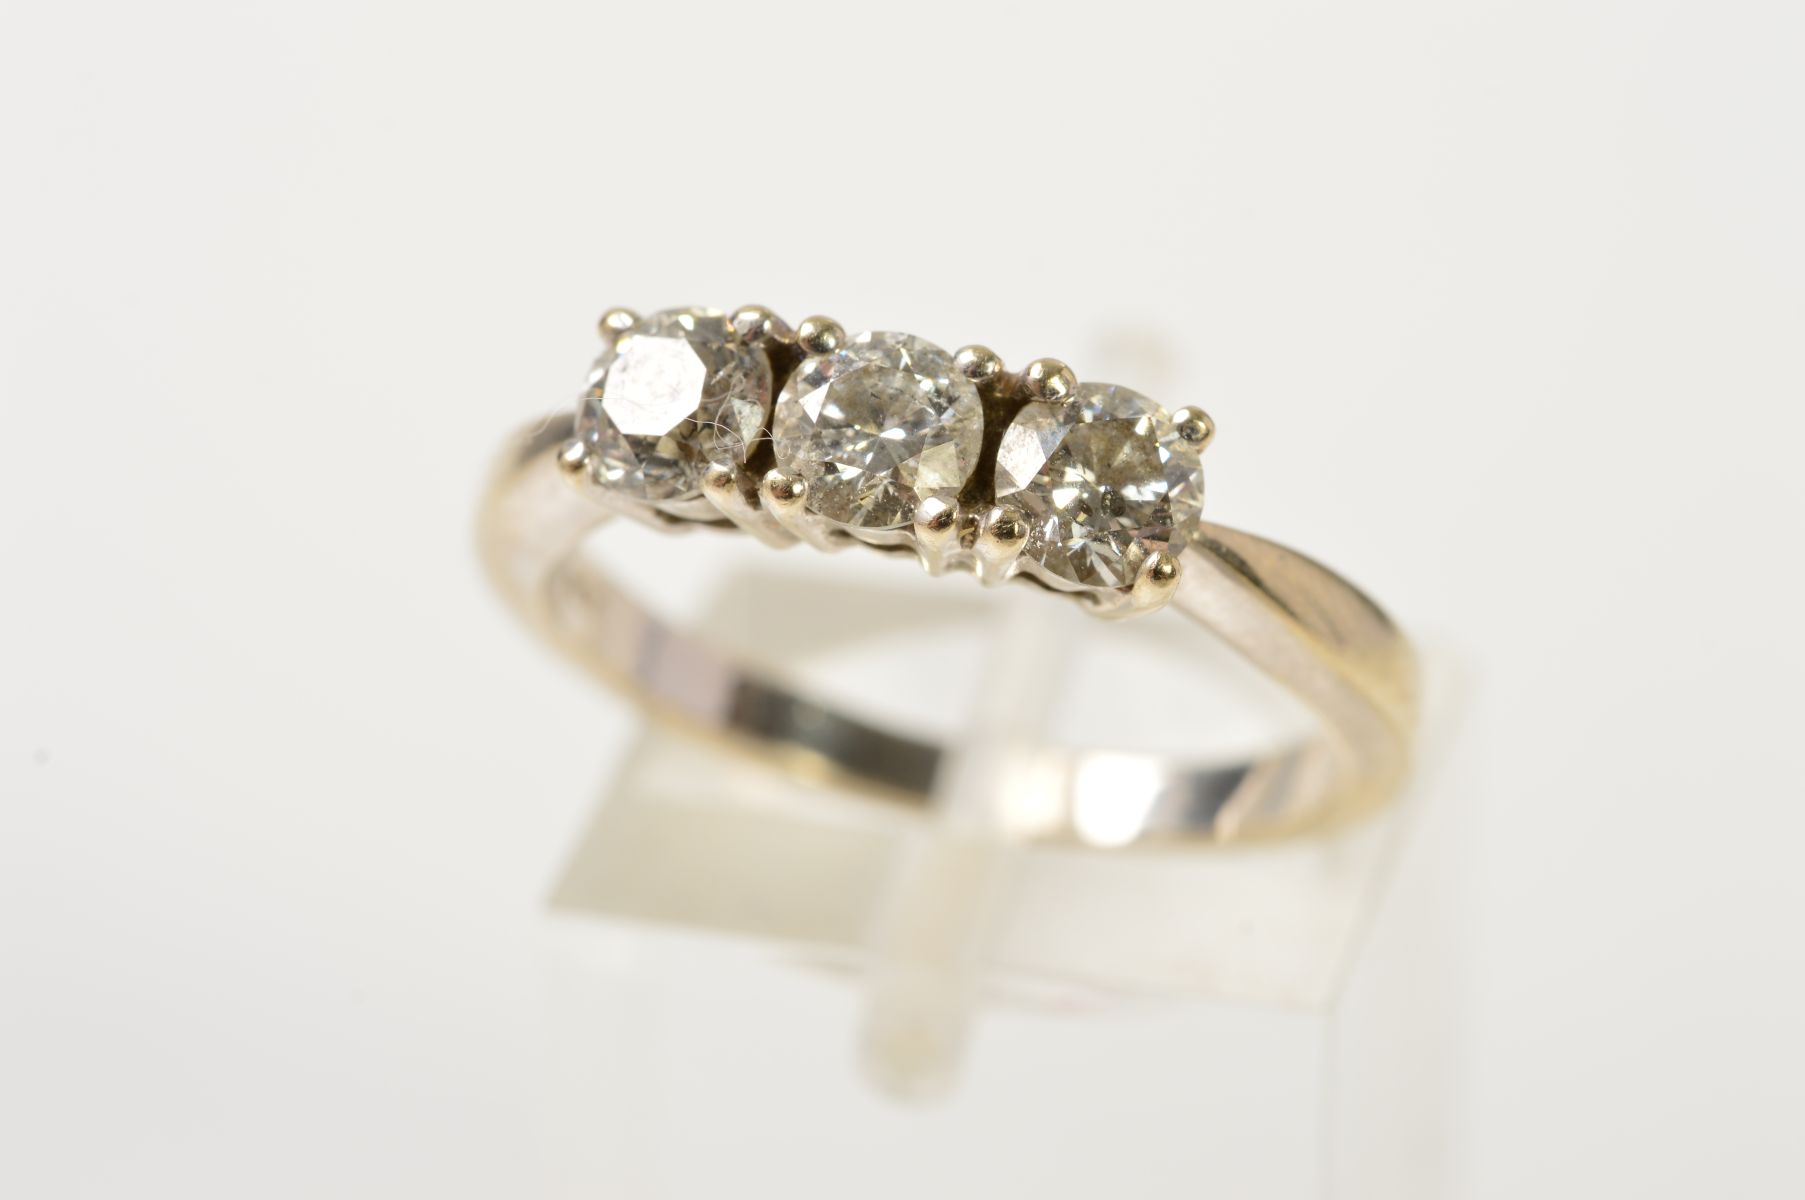 AN 18CT GOLD THREE STONE DIAMOND RING, designed as three brilliant cut diamonds, each within a - Image 3 of 3